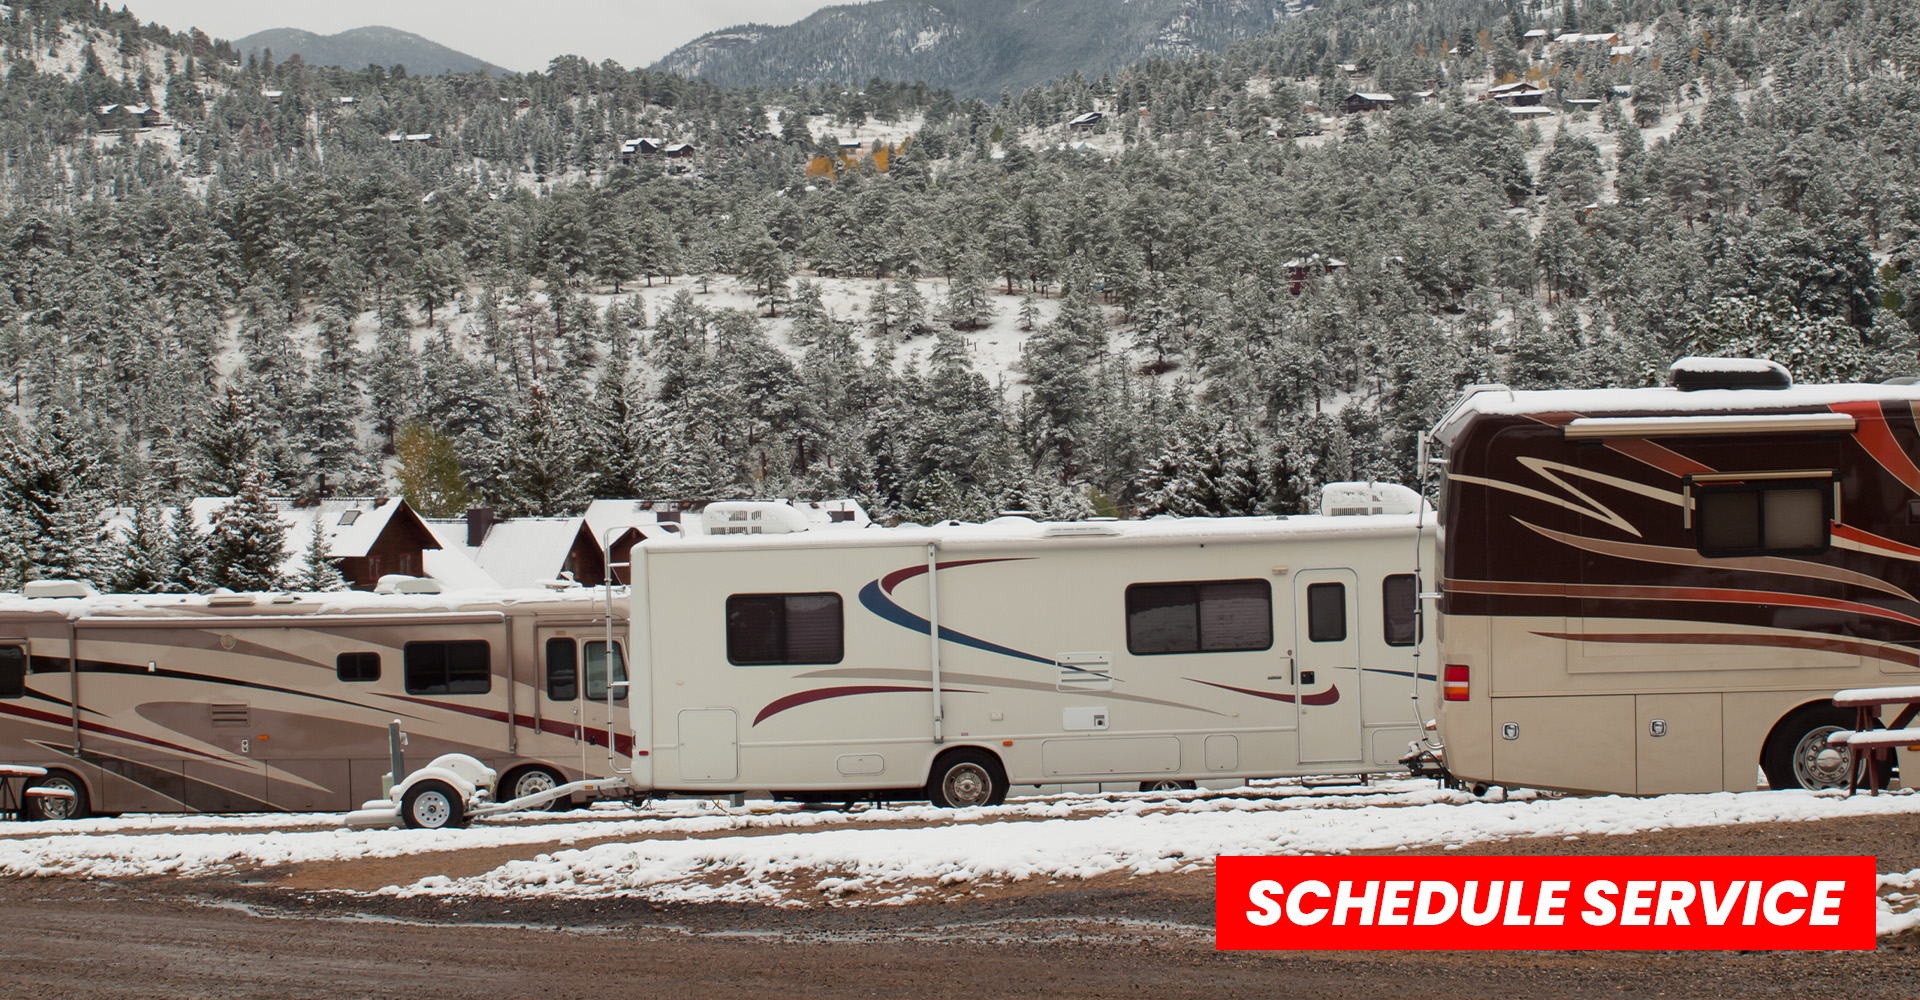 How to Winterize a Camper